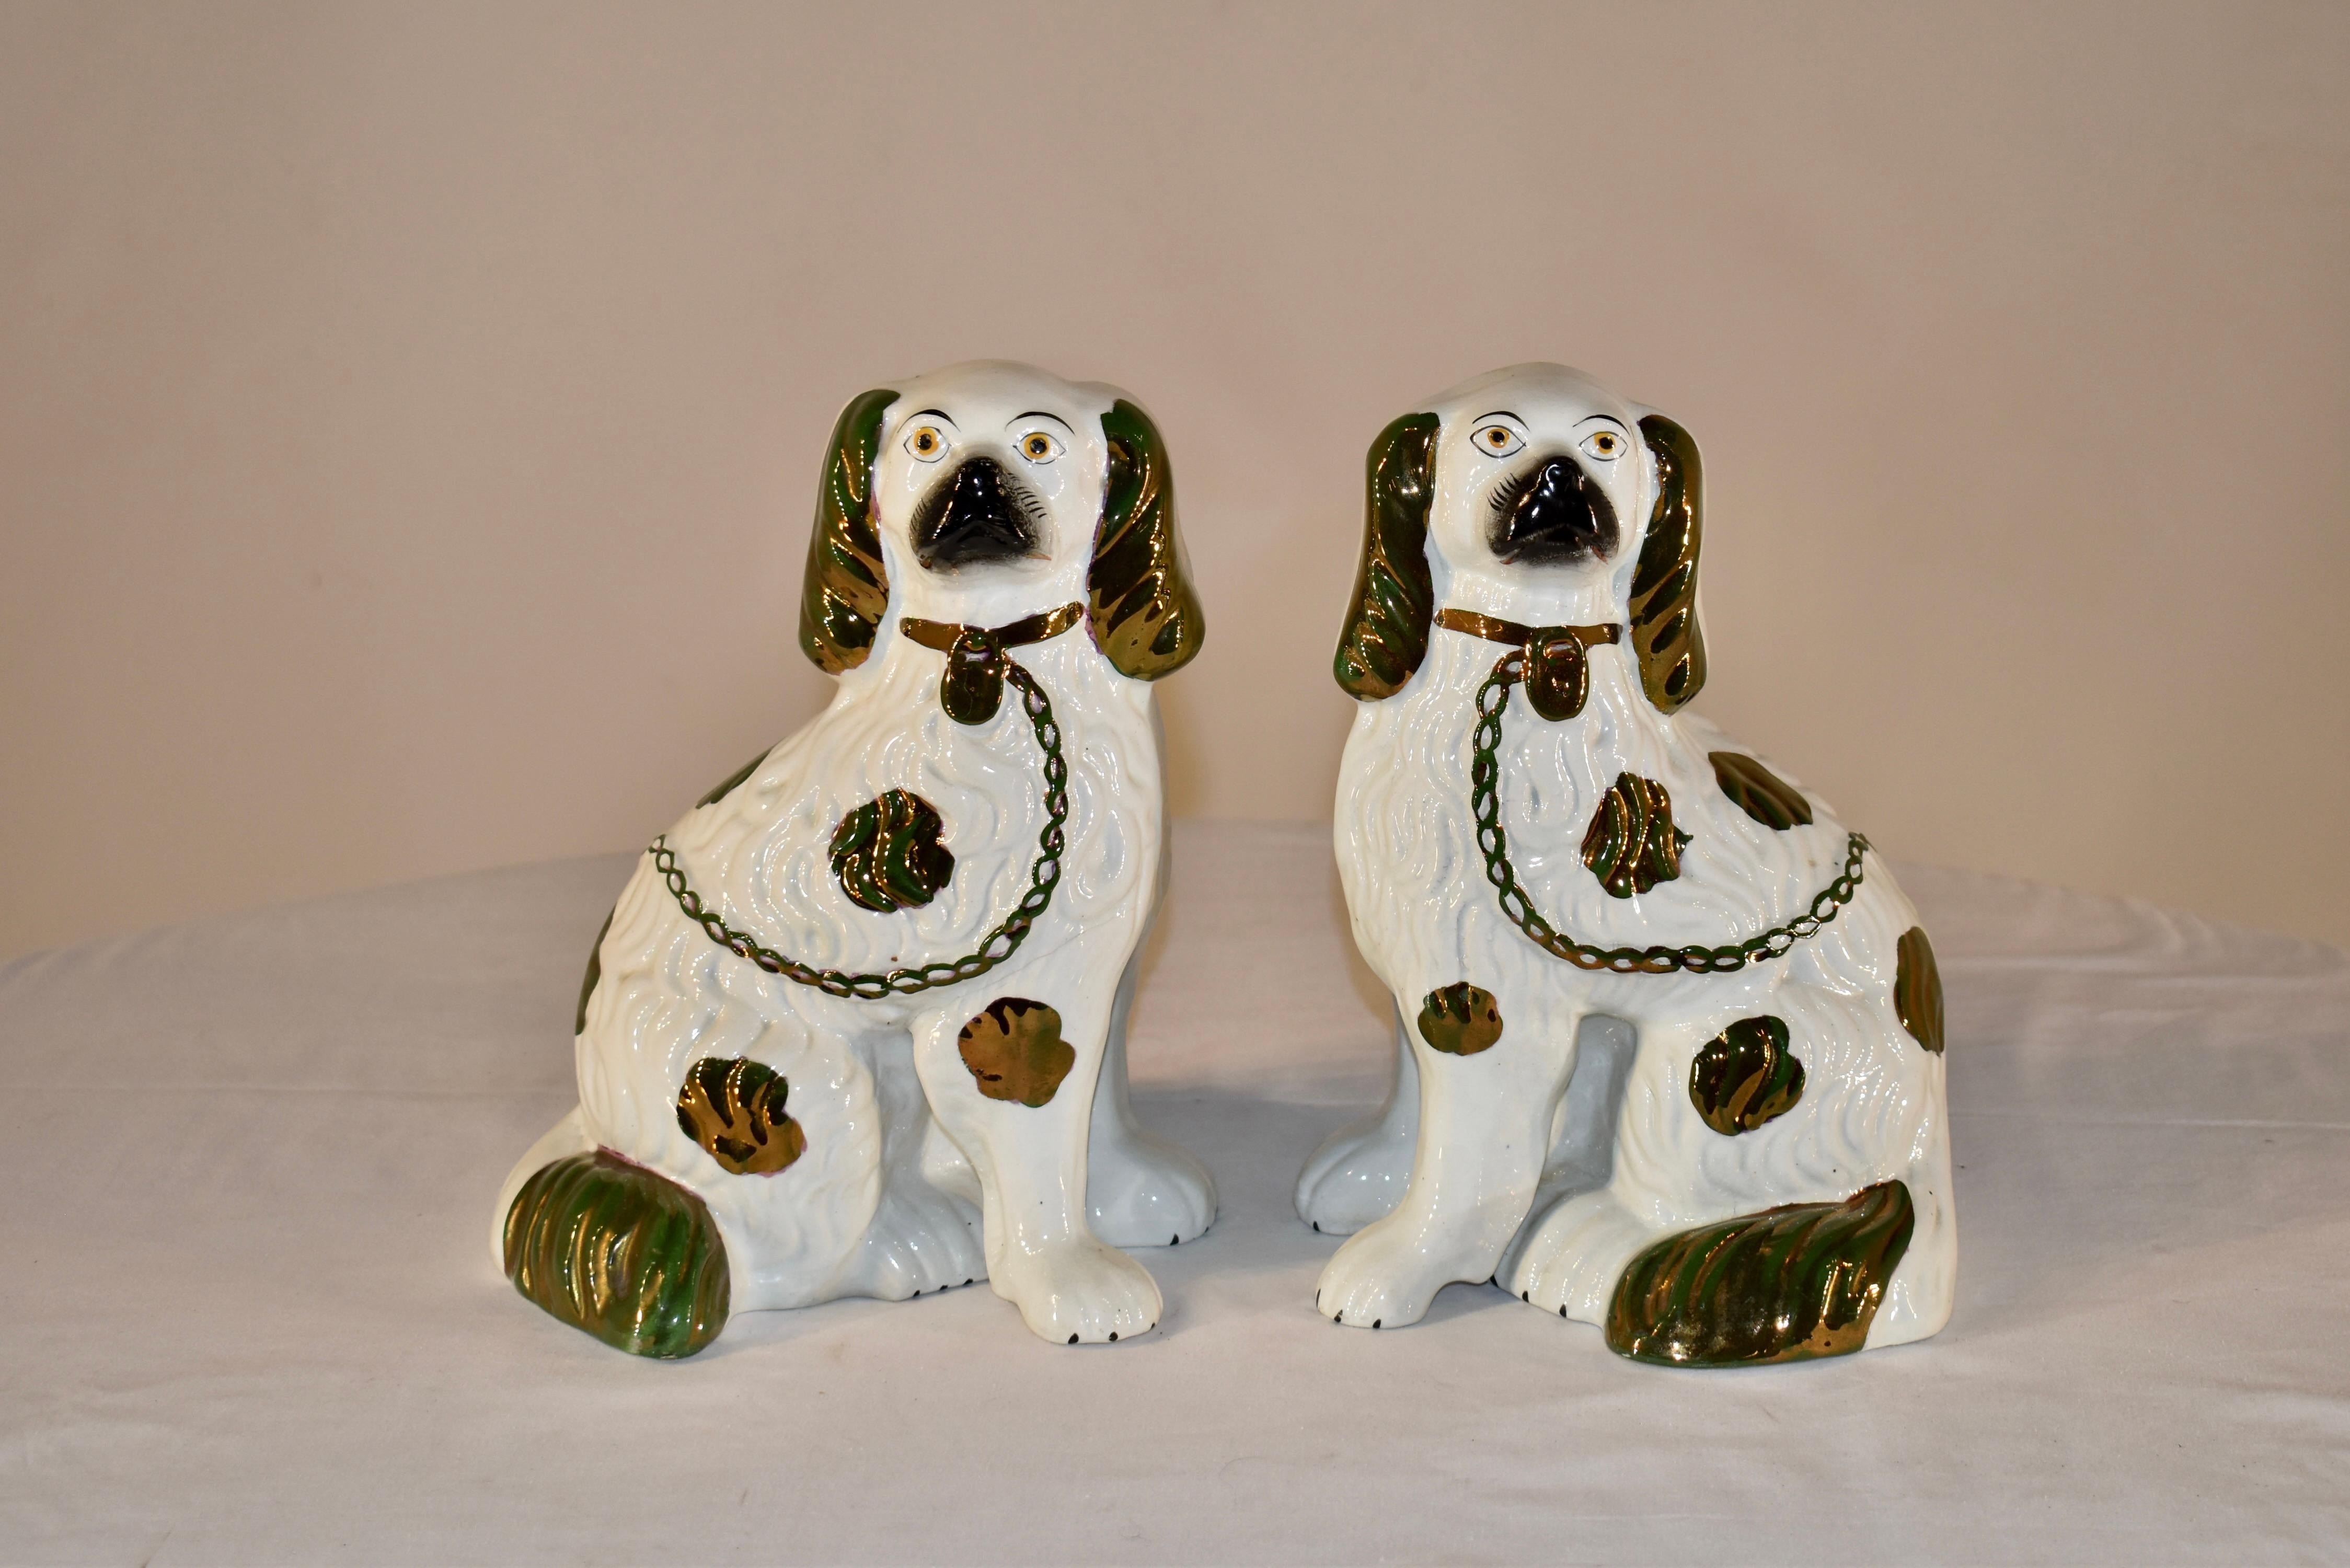 Pair of 19th century Staffordshire spaniels from England. this is a lovely pair, decorated in copper lustre painting and having separated front feet, which is more unusual and harder to find.